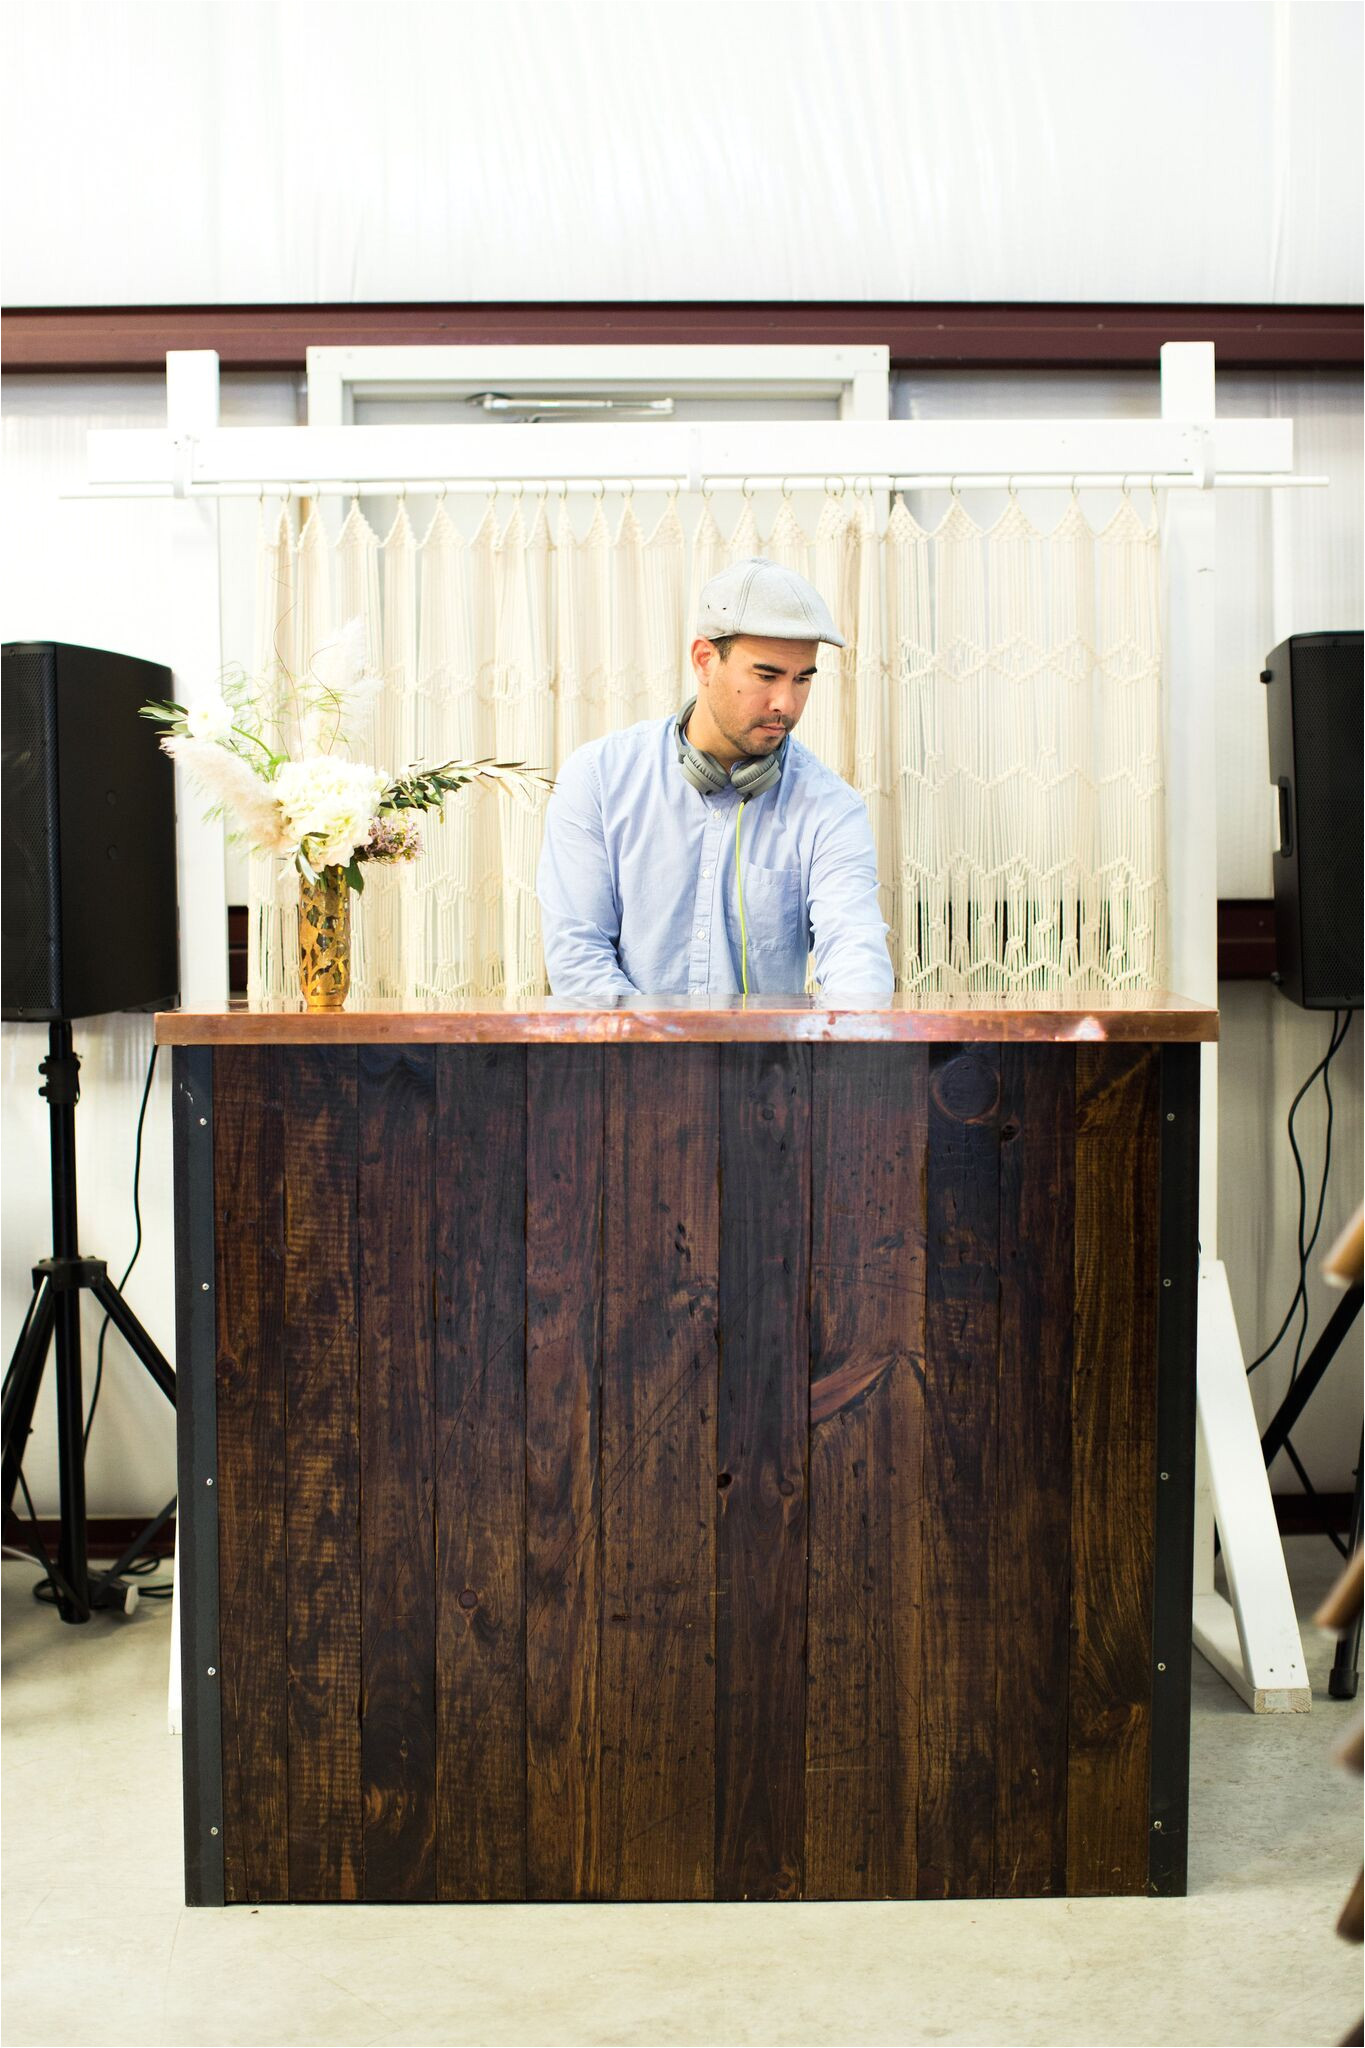 party dj booth using a rustic wood bar with a modern copper top in front of a macrame backdrop via birch brass vintage rentals for weddings and special